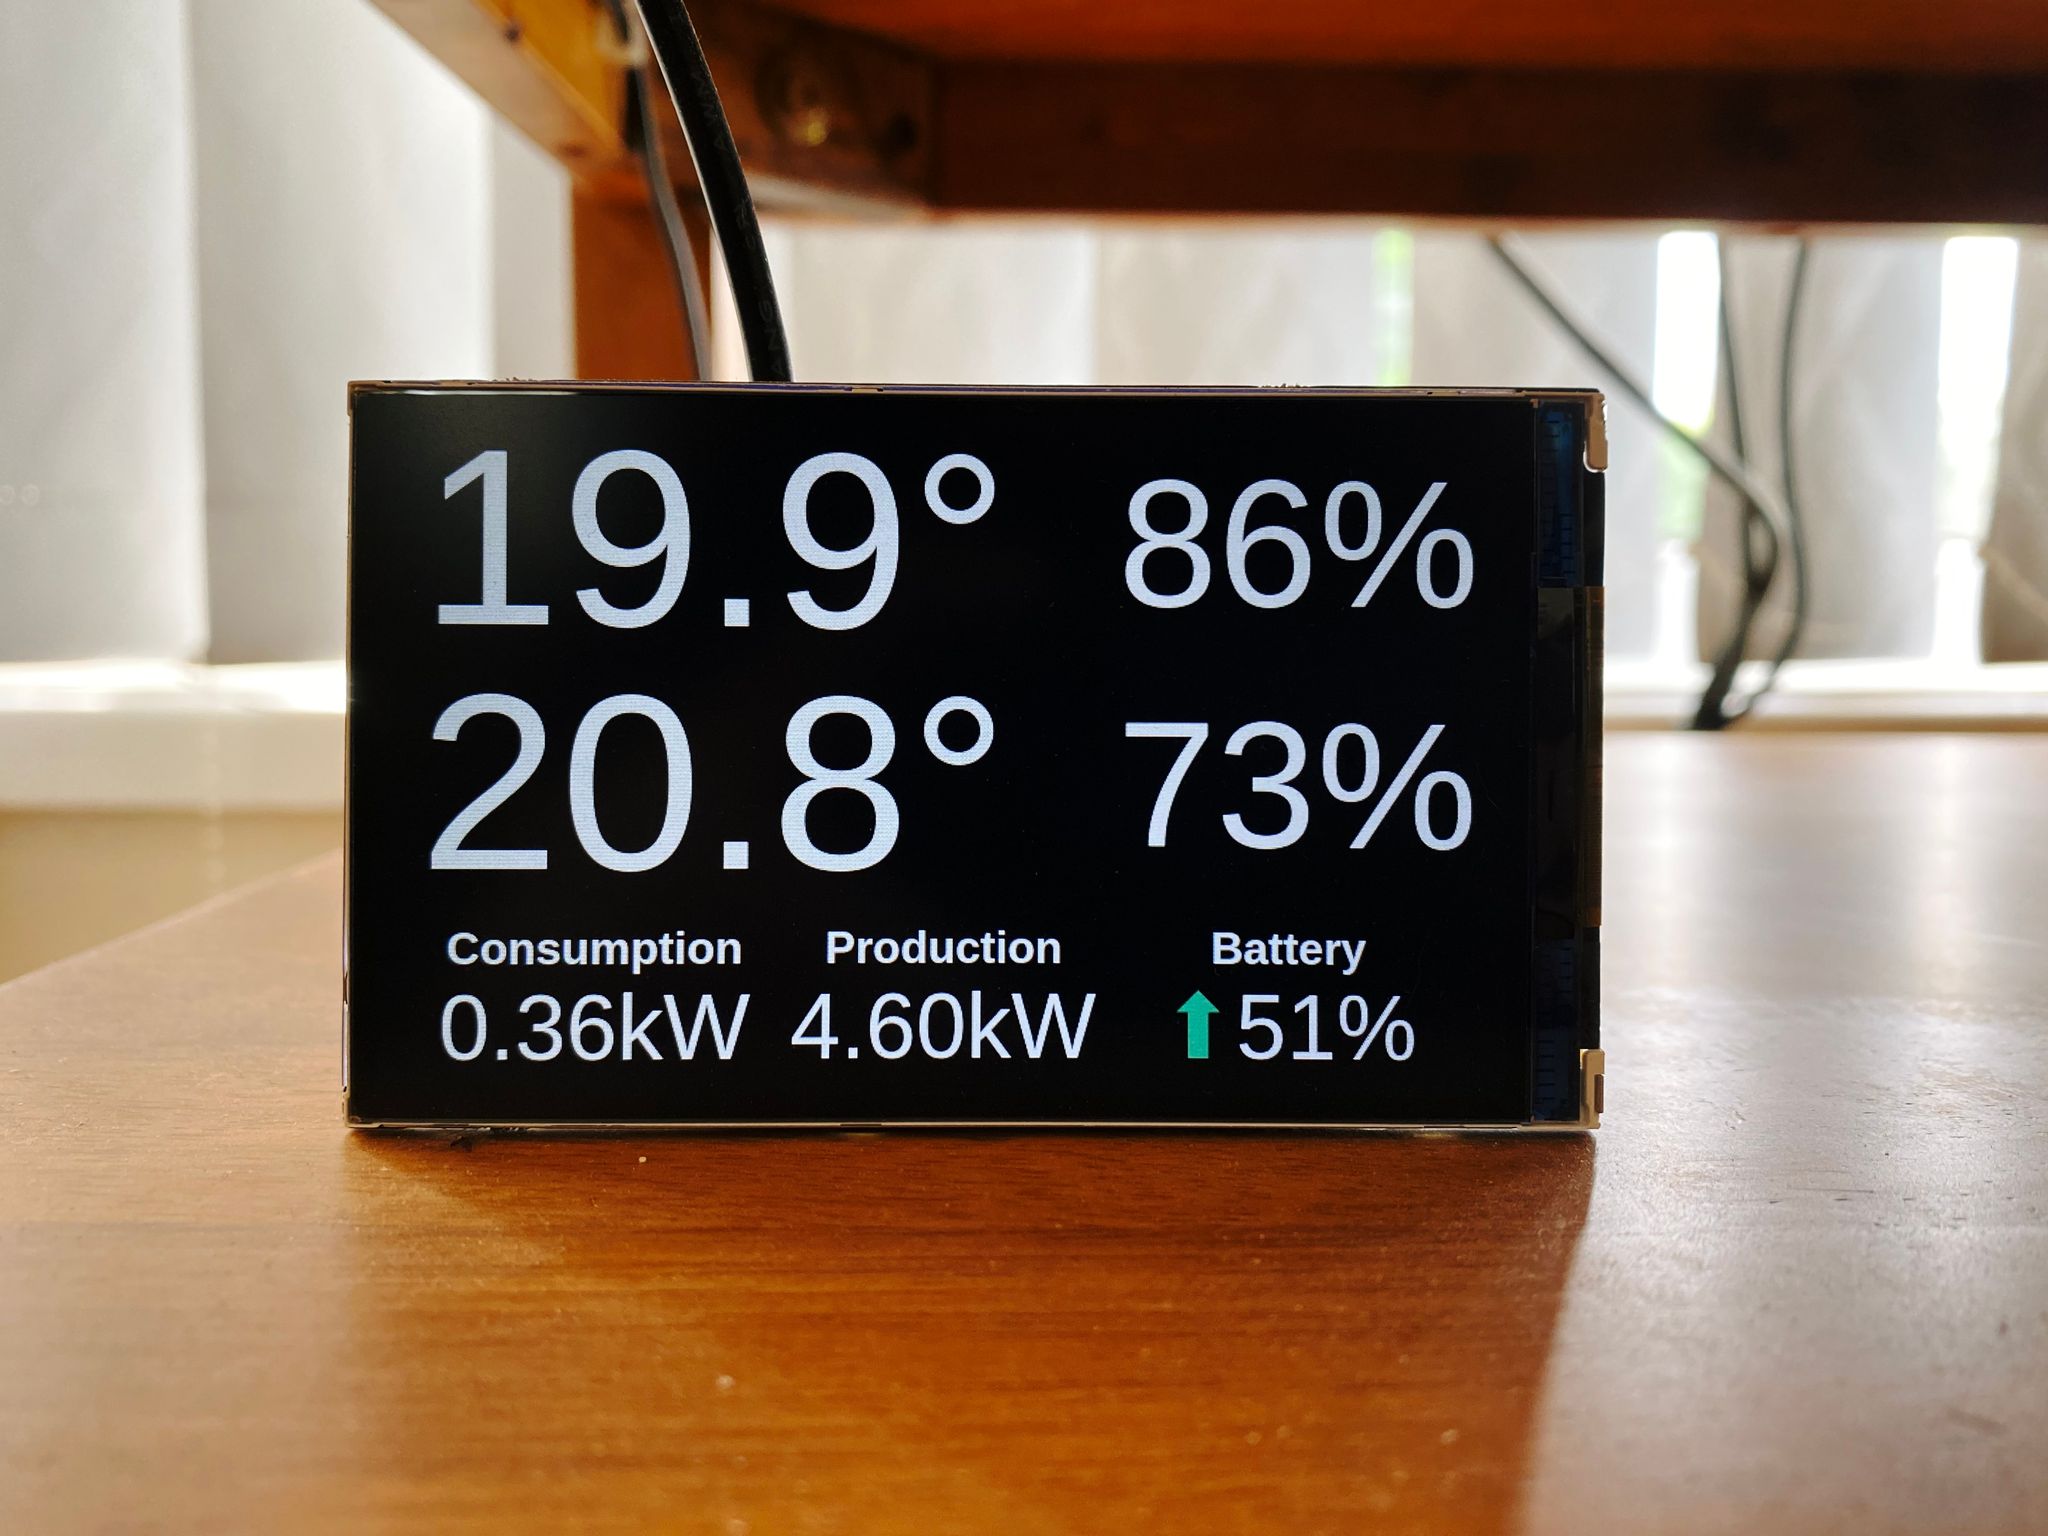 A photo of a small LCD display showing indoor and outdoor temperature, how much power we're consuming and producing from the solar panels, and the battery charge percentage. Next to the percentage is a green up arrow that indicates it's being charged, if it's discharging it changes to a red down arrow.